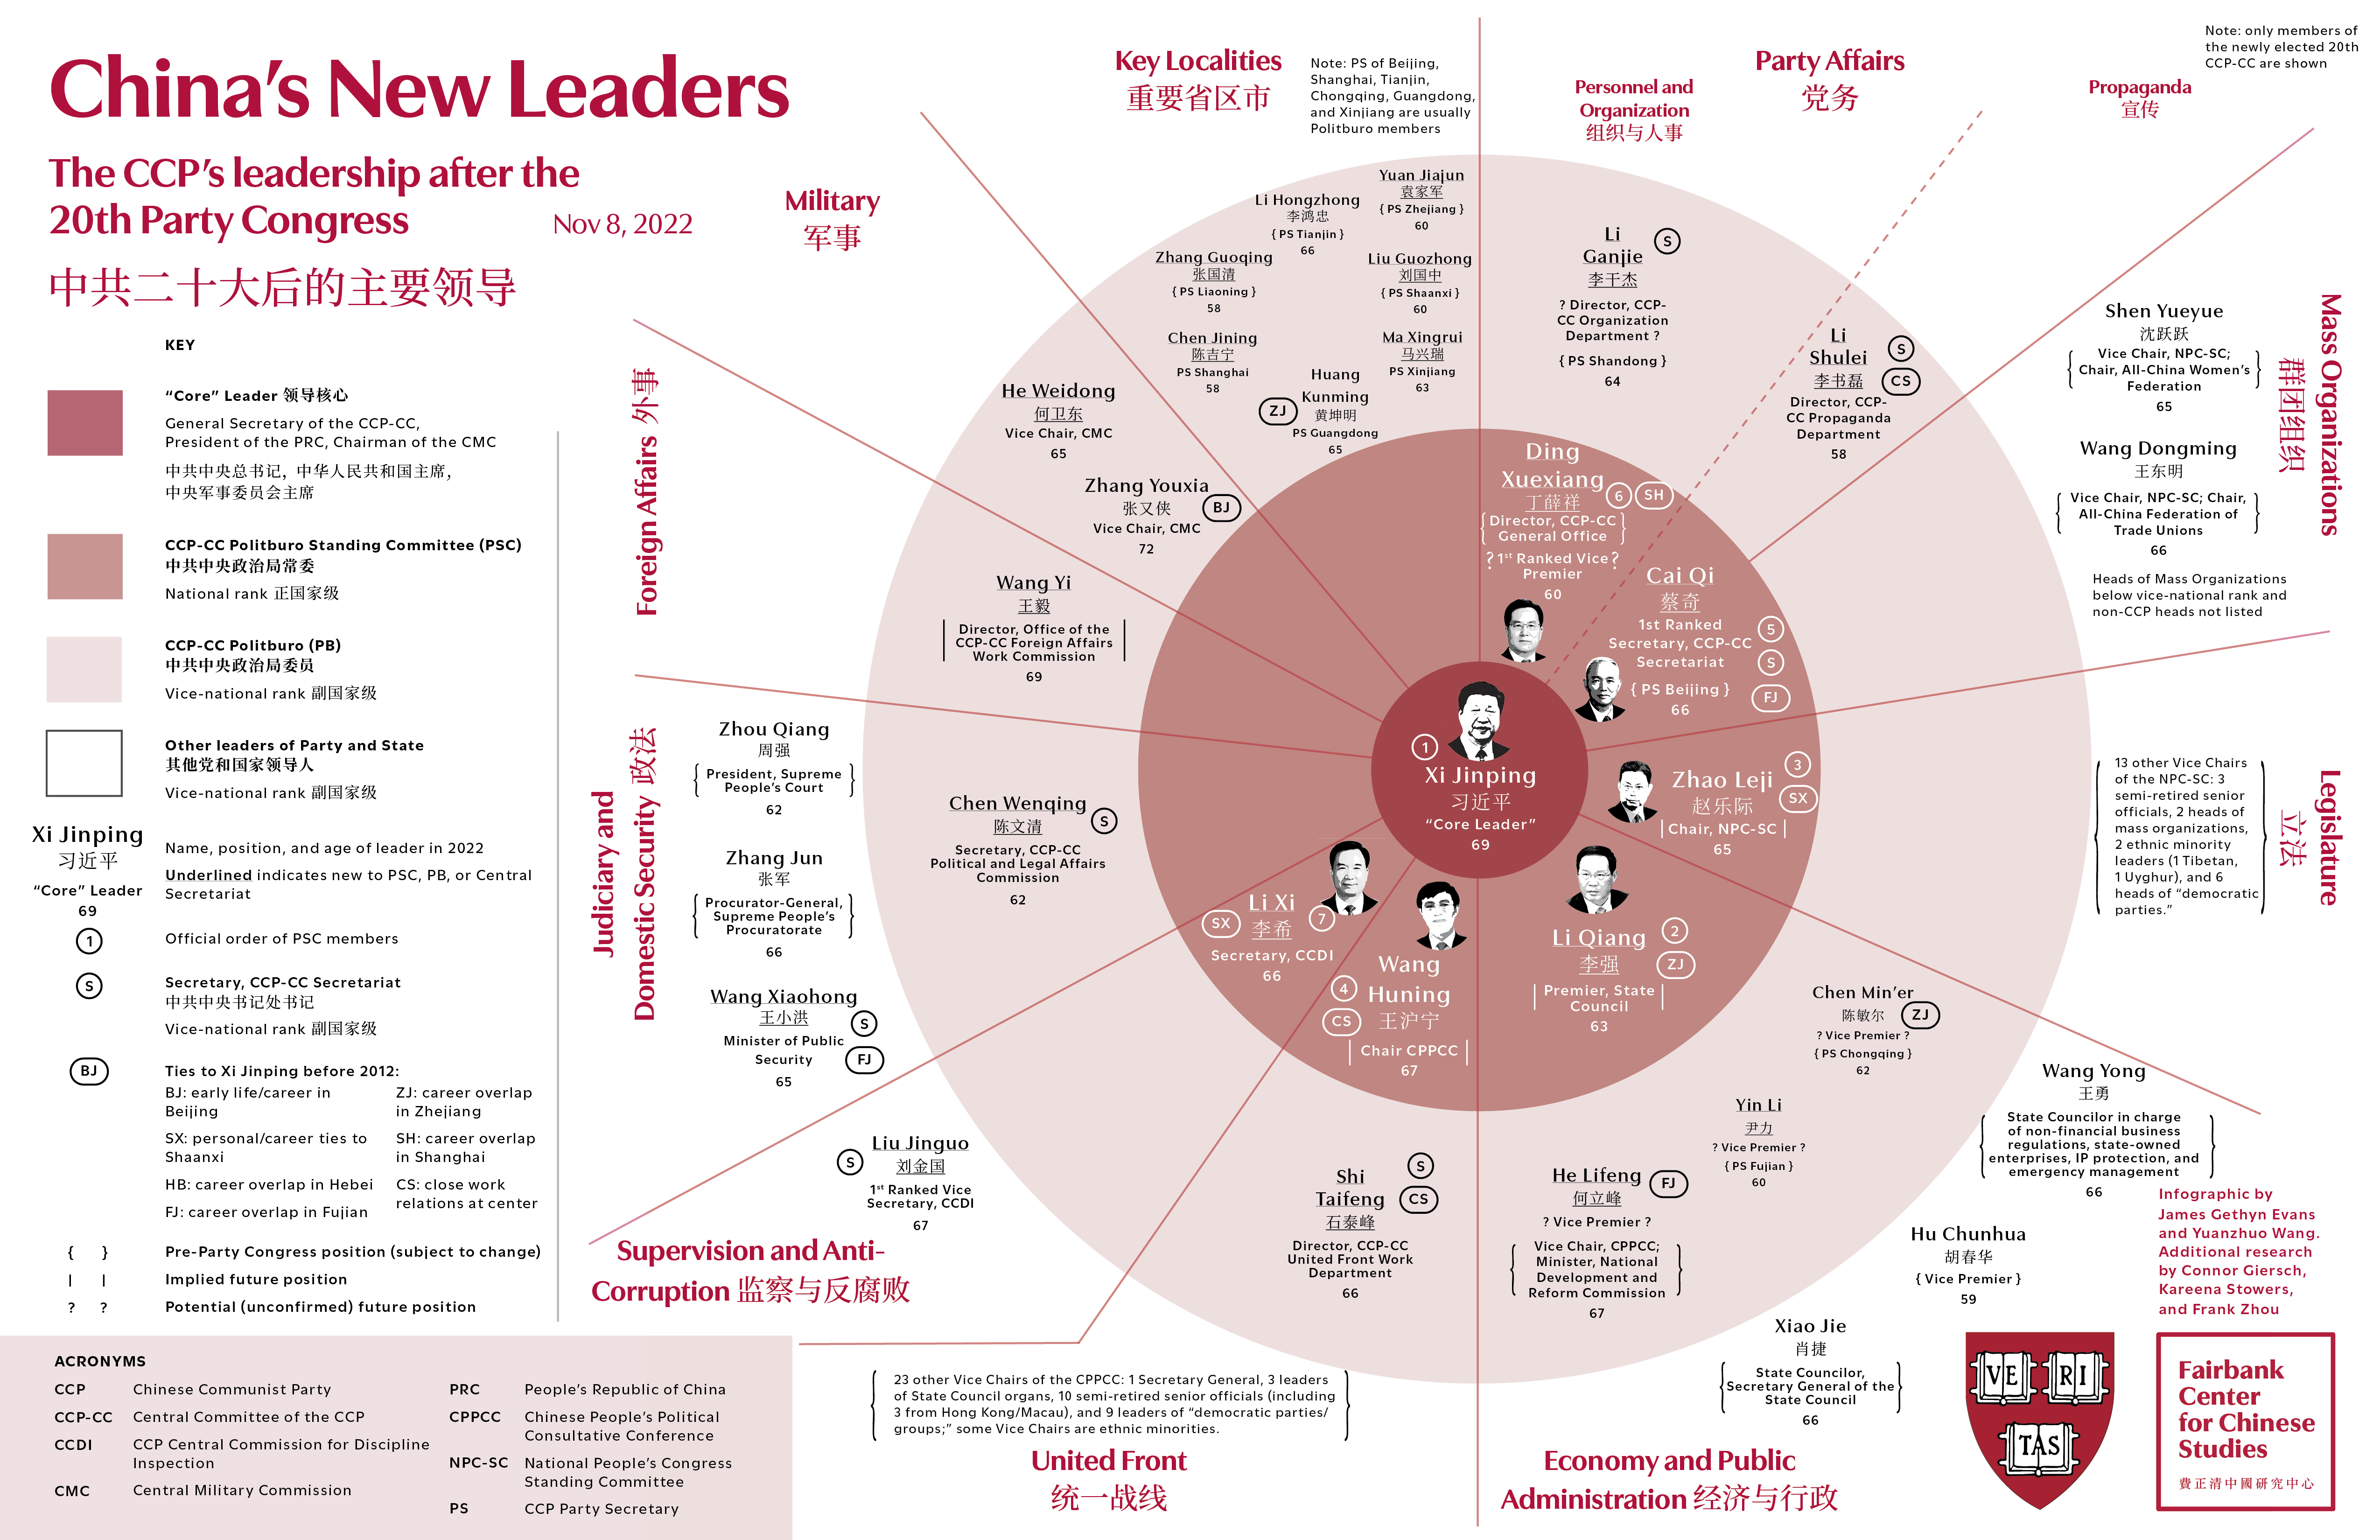 Infographic China's New Leaders after the 20th Party Congress